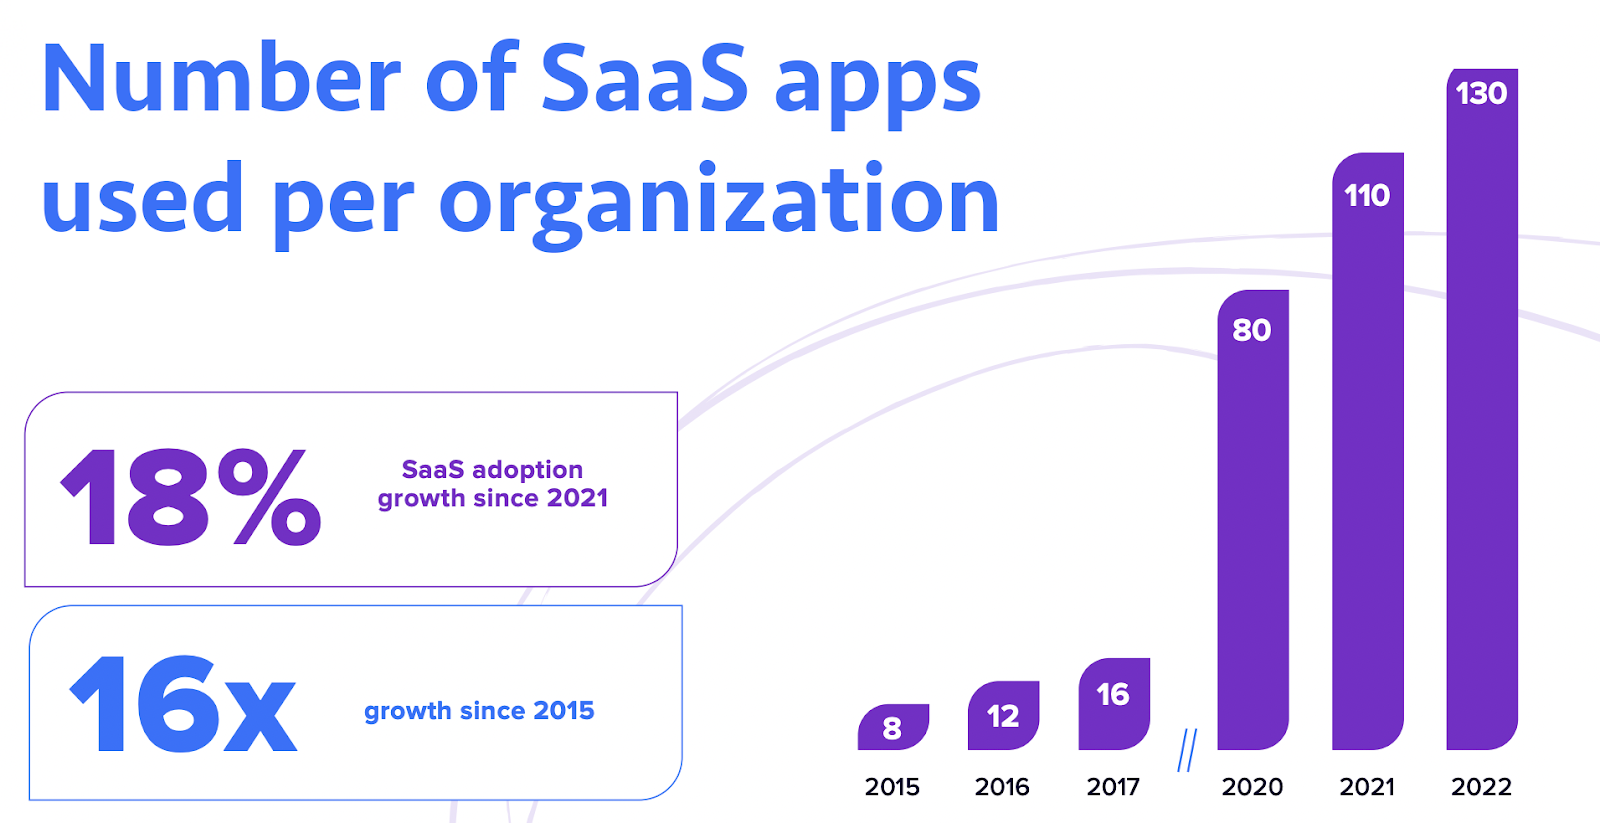 Graph showing SaaS adoption statistics from 2015 to 2022.